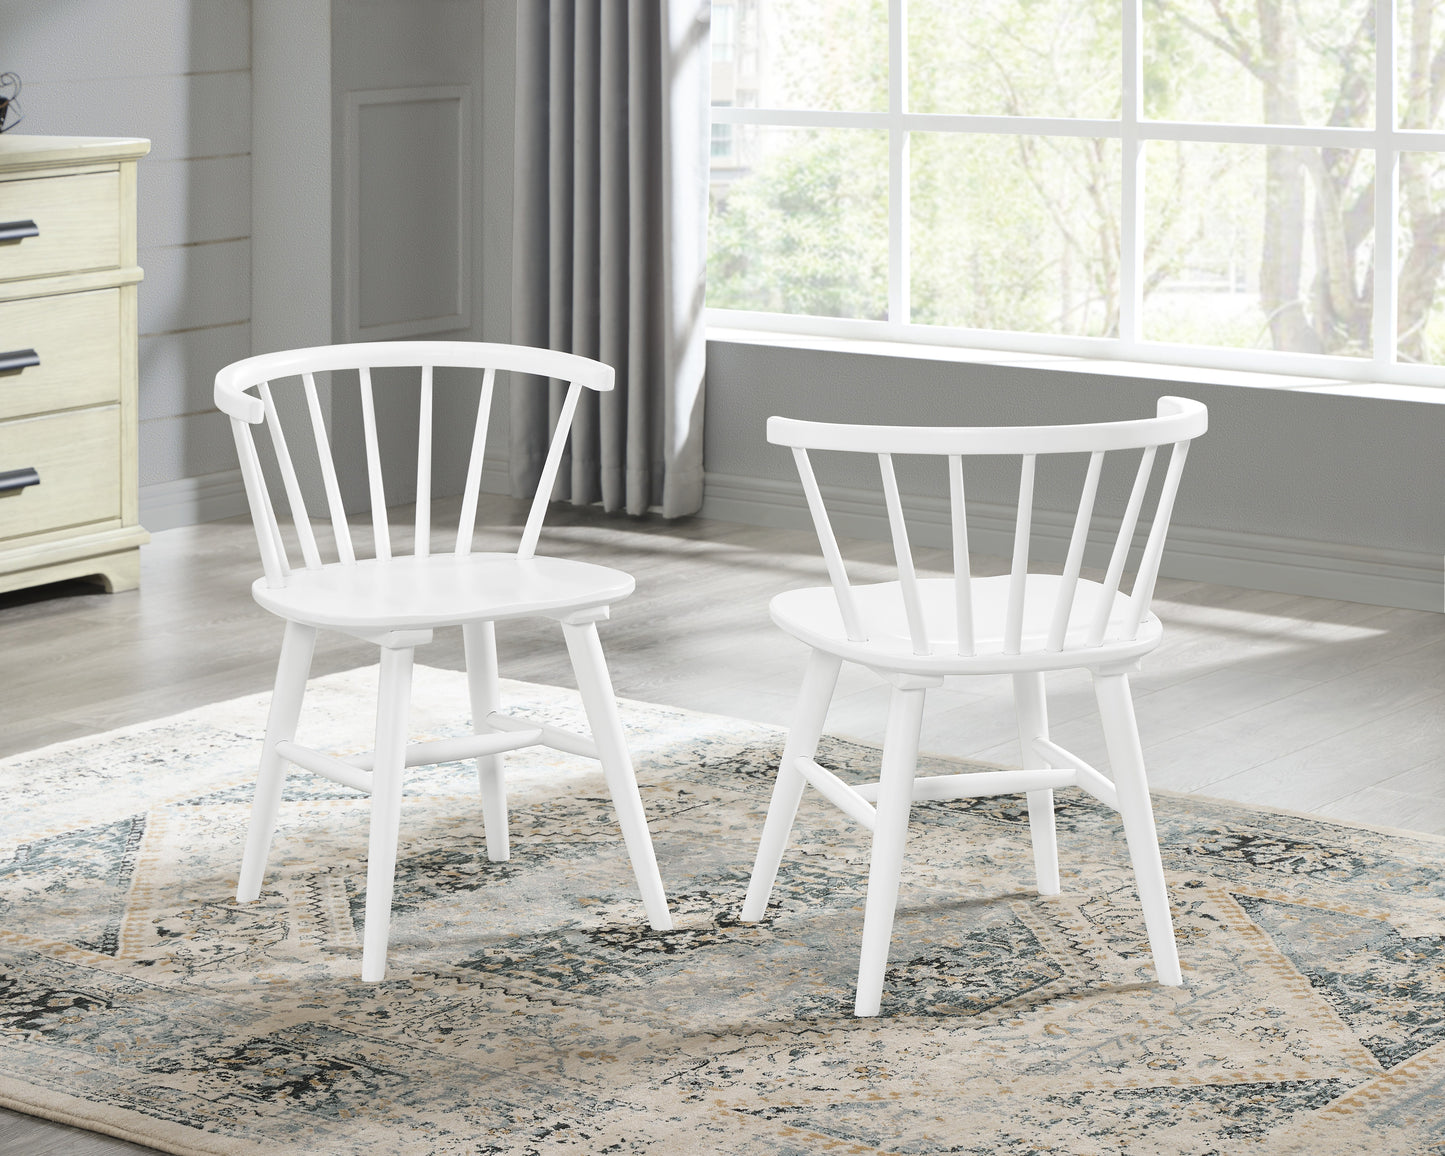 Alwynn White and Natural Wood 5-piece Dining Set, Dining Table with 4 Stylish Chairs